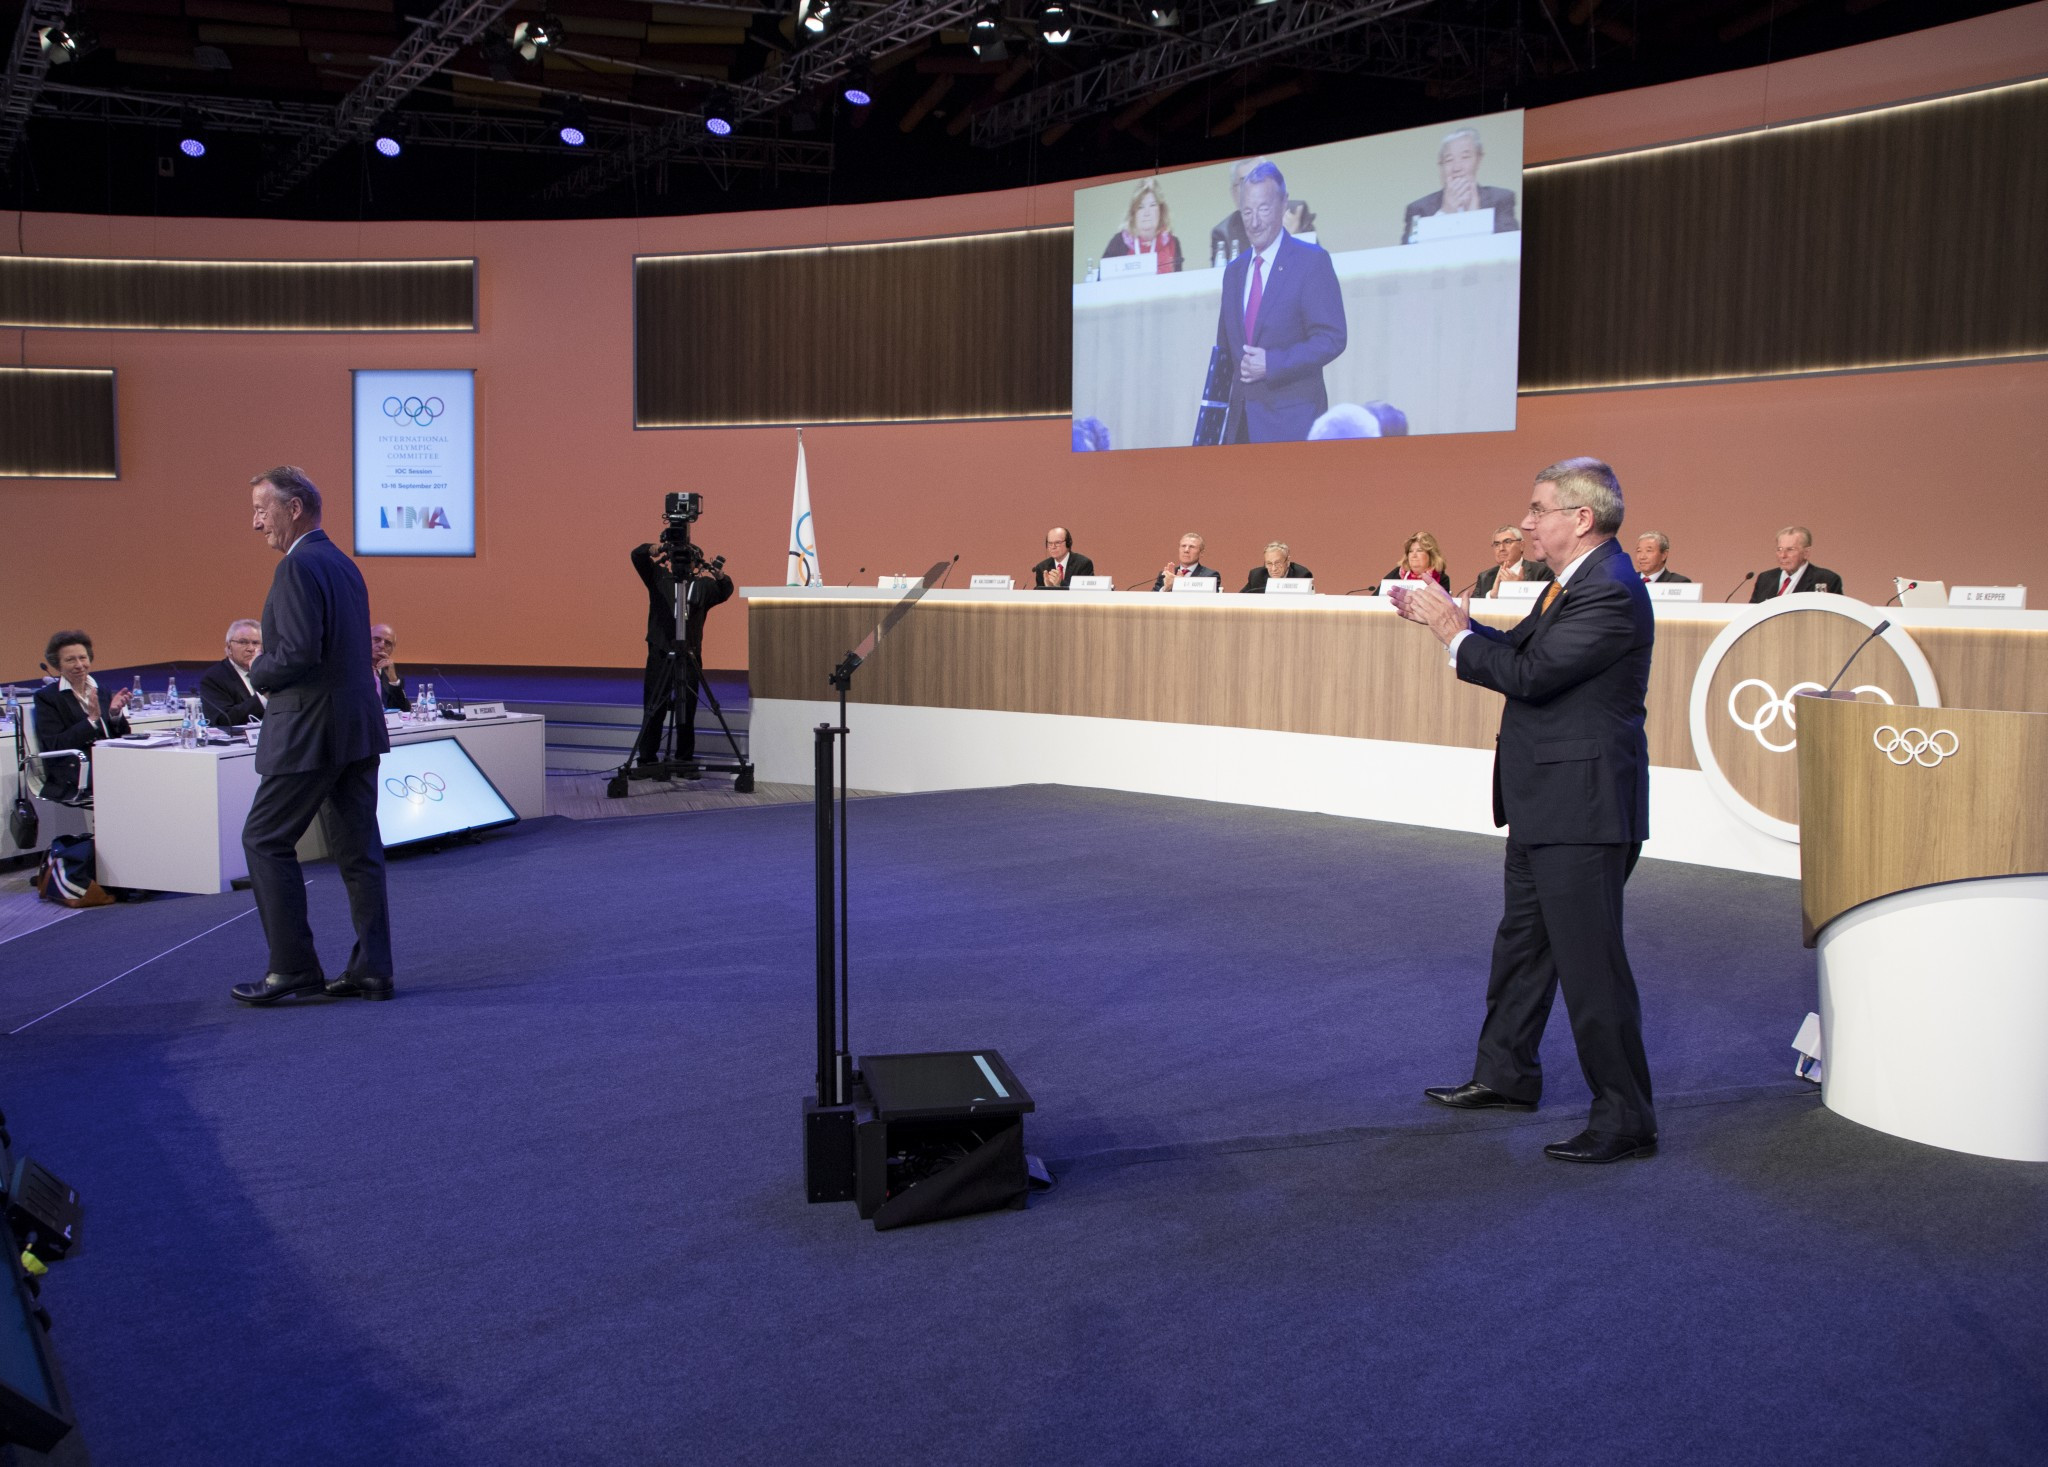 131st International Olympic Committee Session: Day three